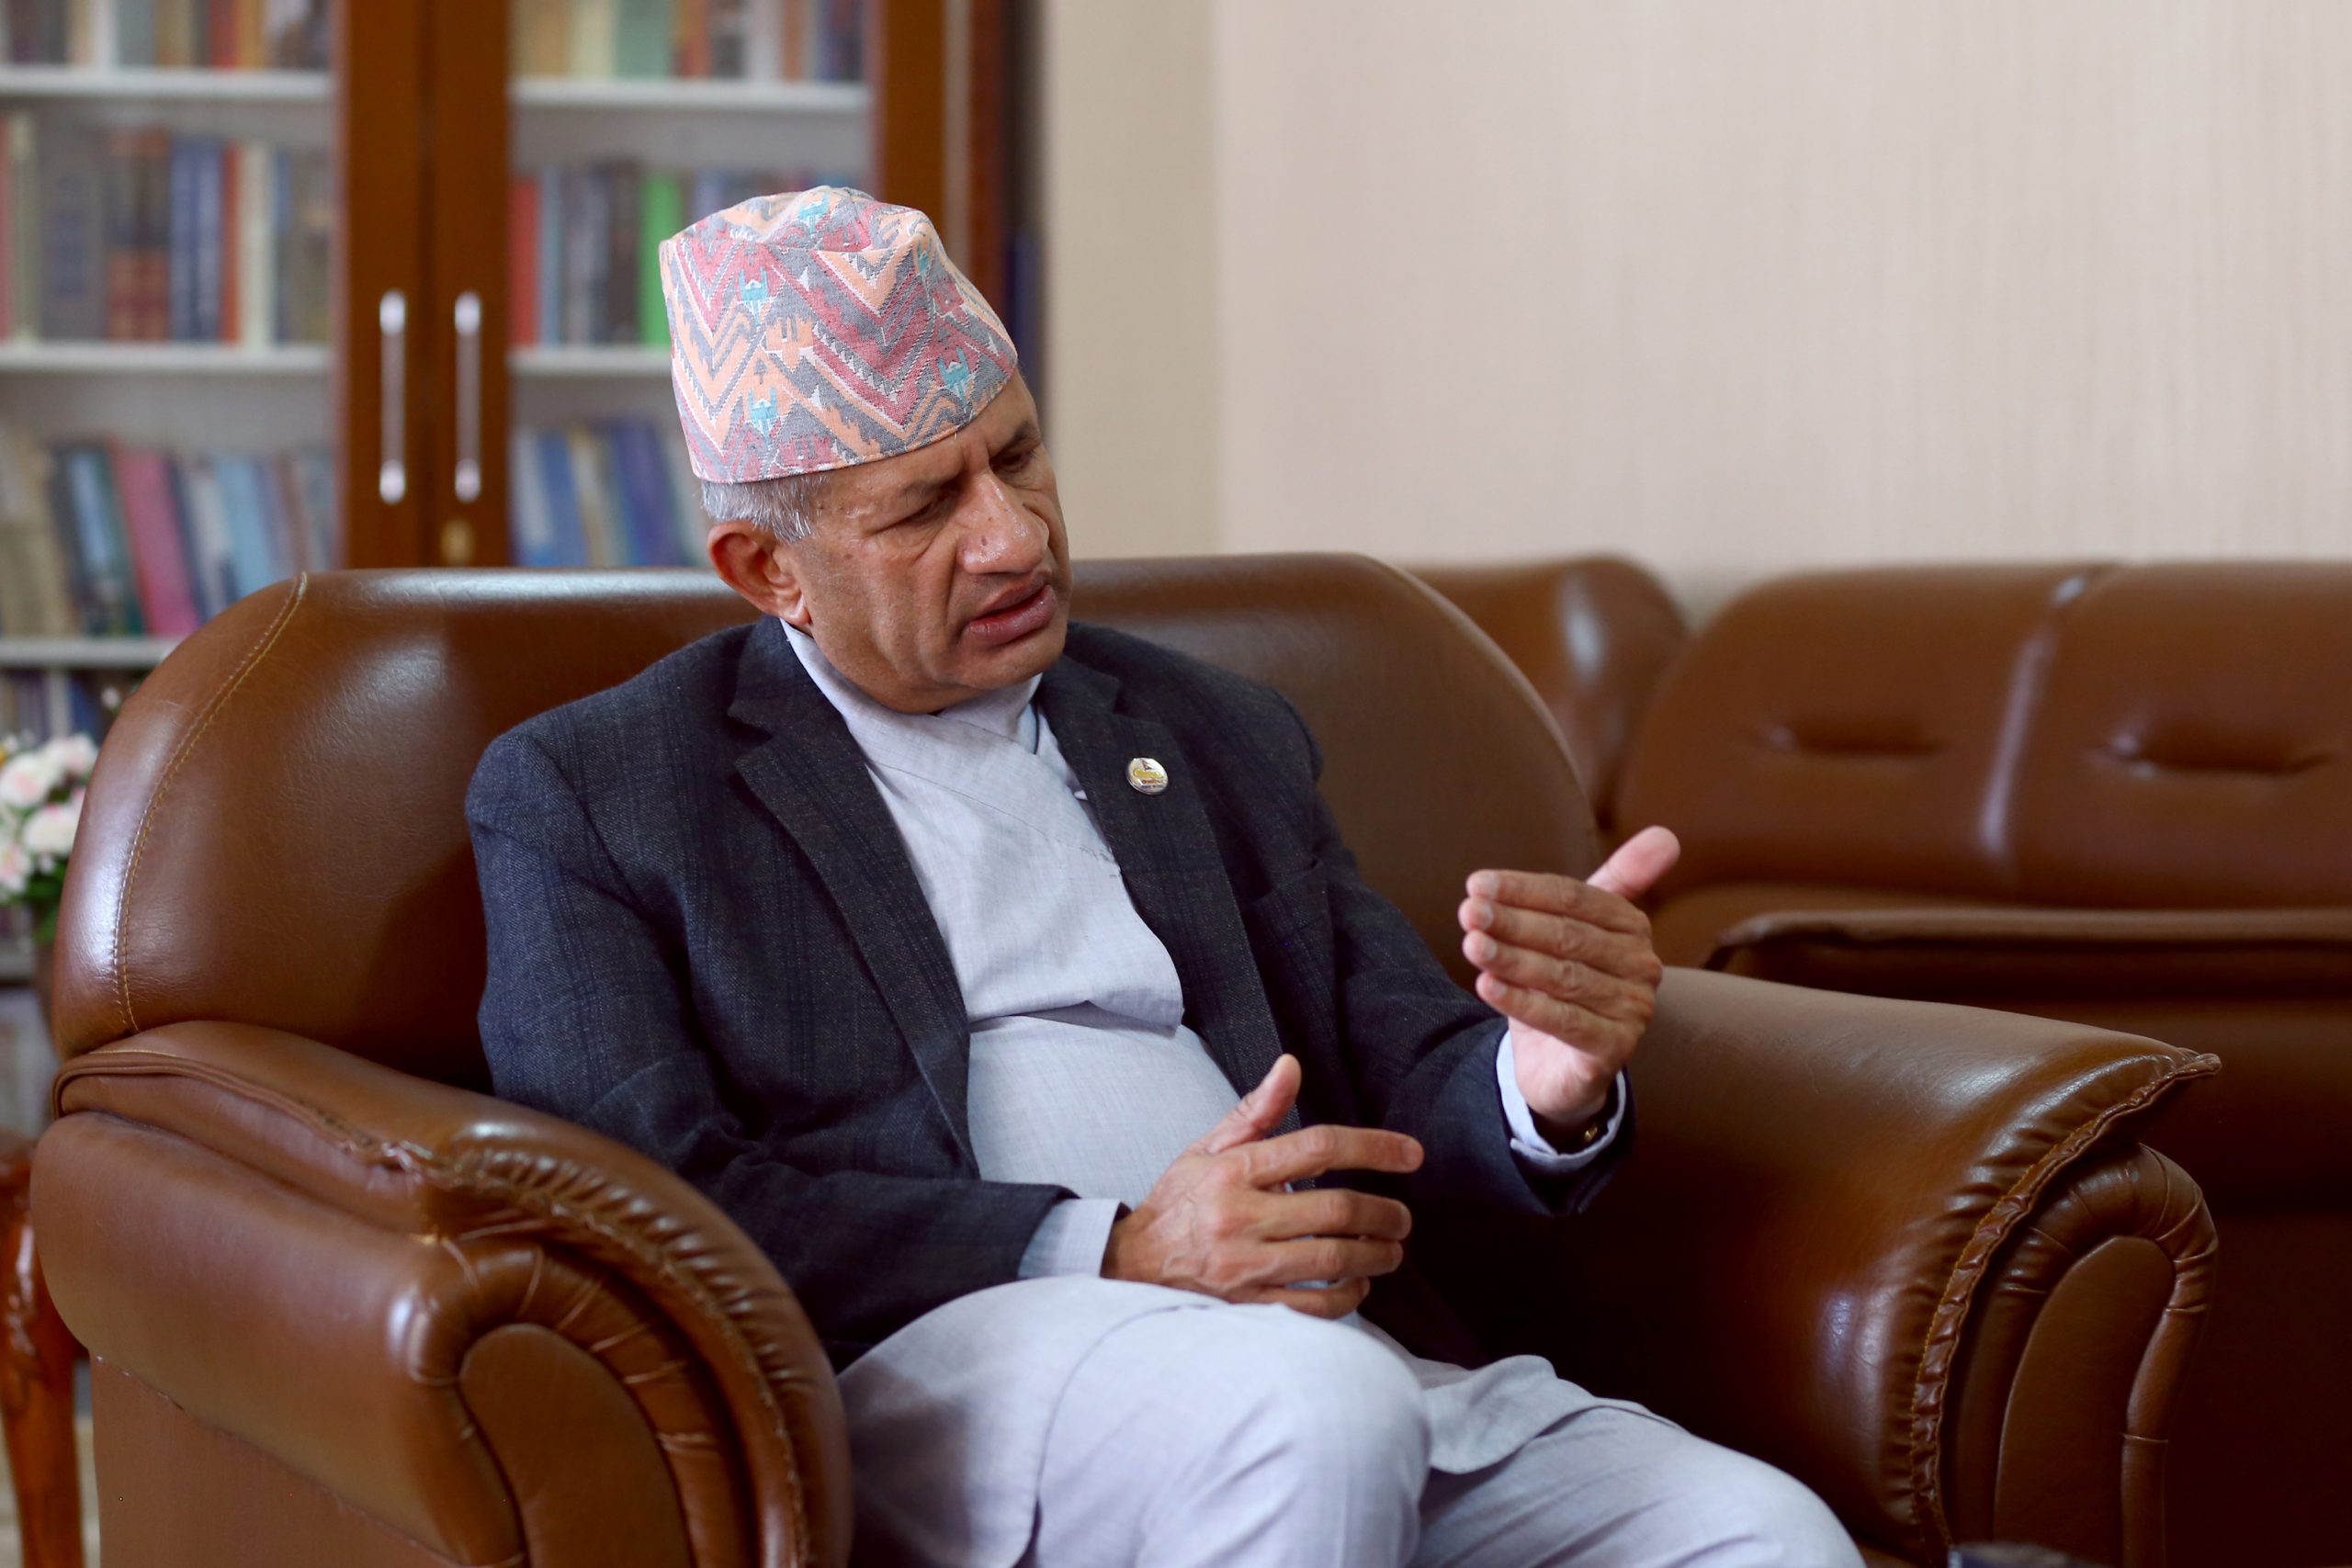 Foreign Minister Gyawali claims development goals will be met despite the pandemic